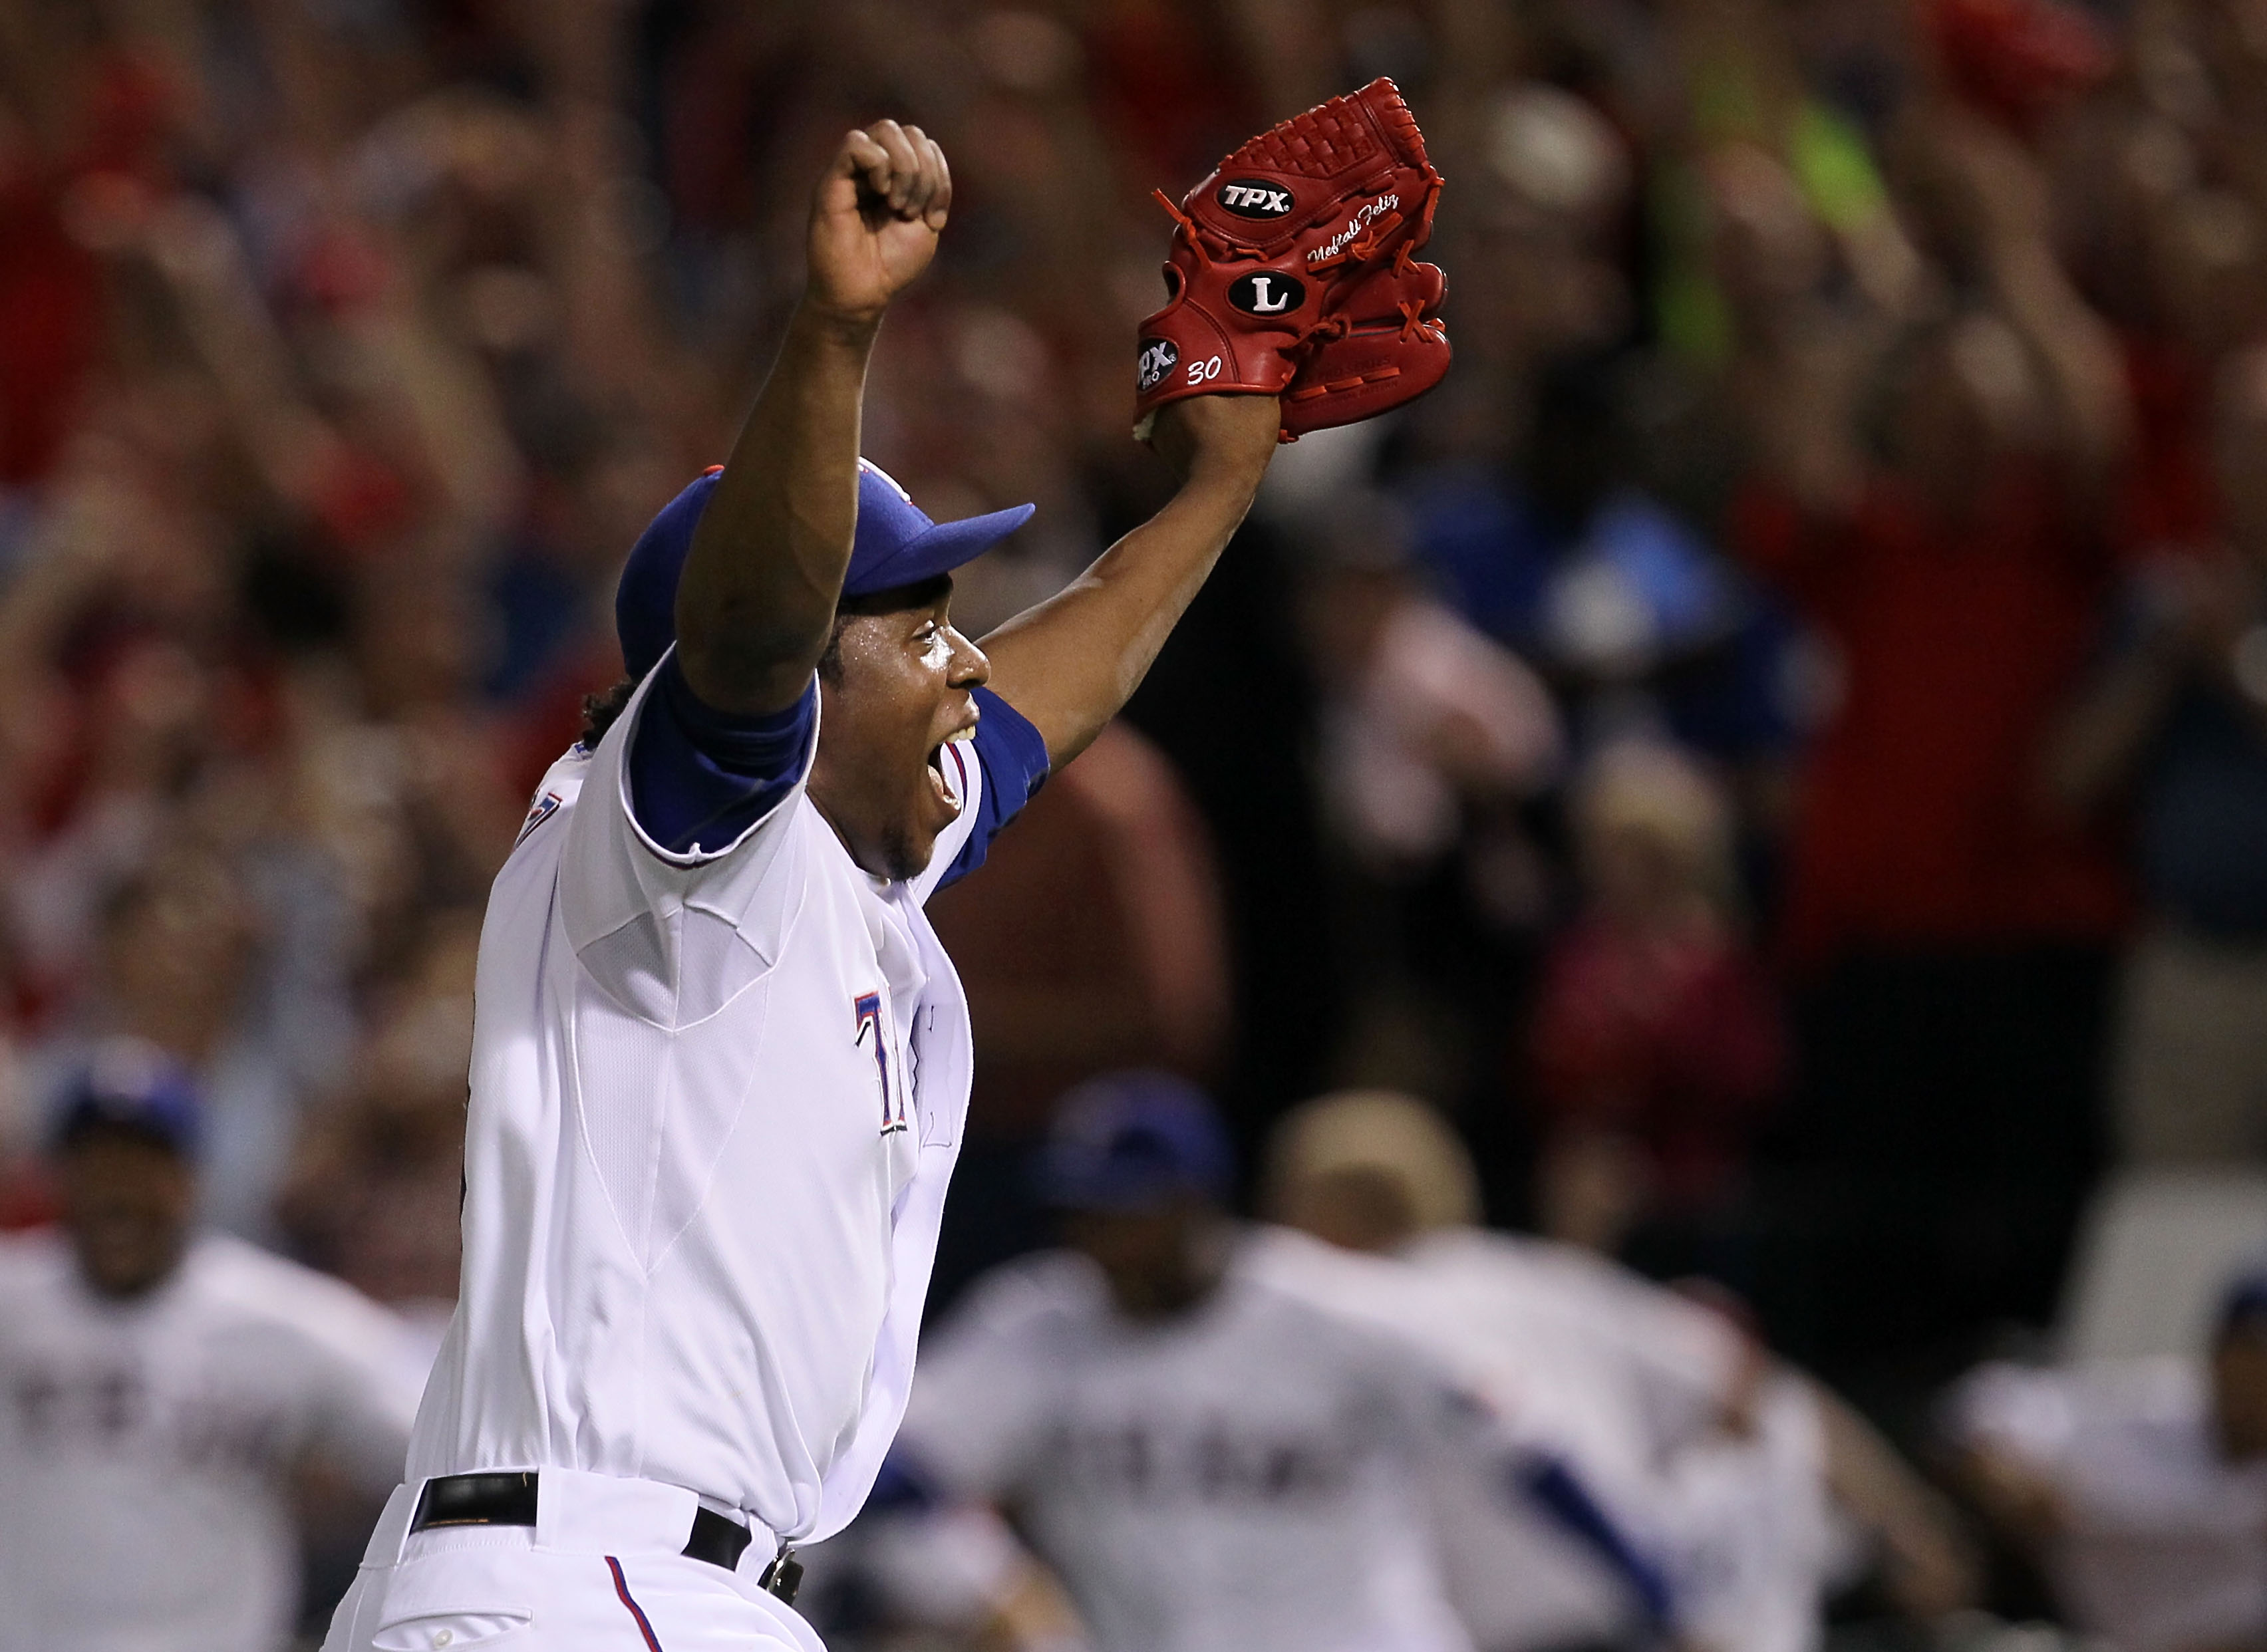 ARLINGTON, TX - OCTOBER 22:  Neftali Feliz #30 of the Texas Rangers celebrates after defeating the New York Yankees 6-1 in Game Six of the ALCS to advance to the World Series during the 2010 MLB Playoffs at Rangers Ballpark in Arlington on October 22, 201